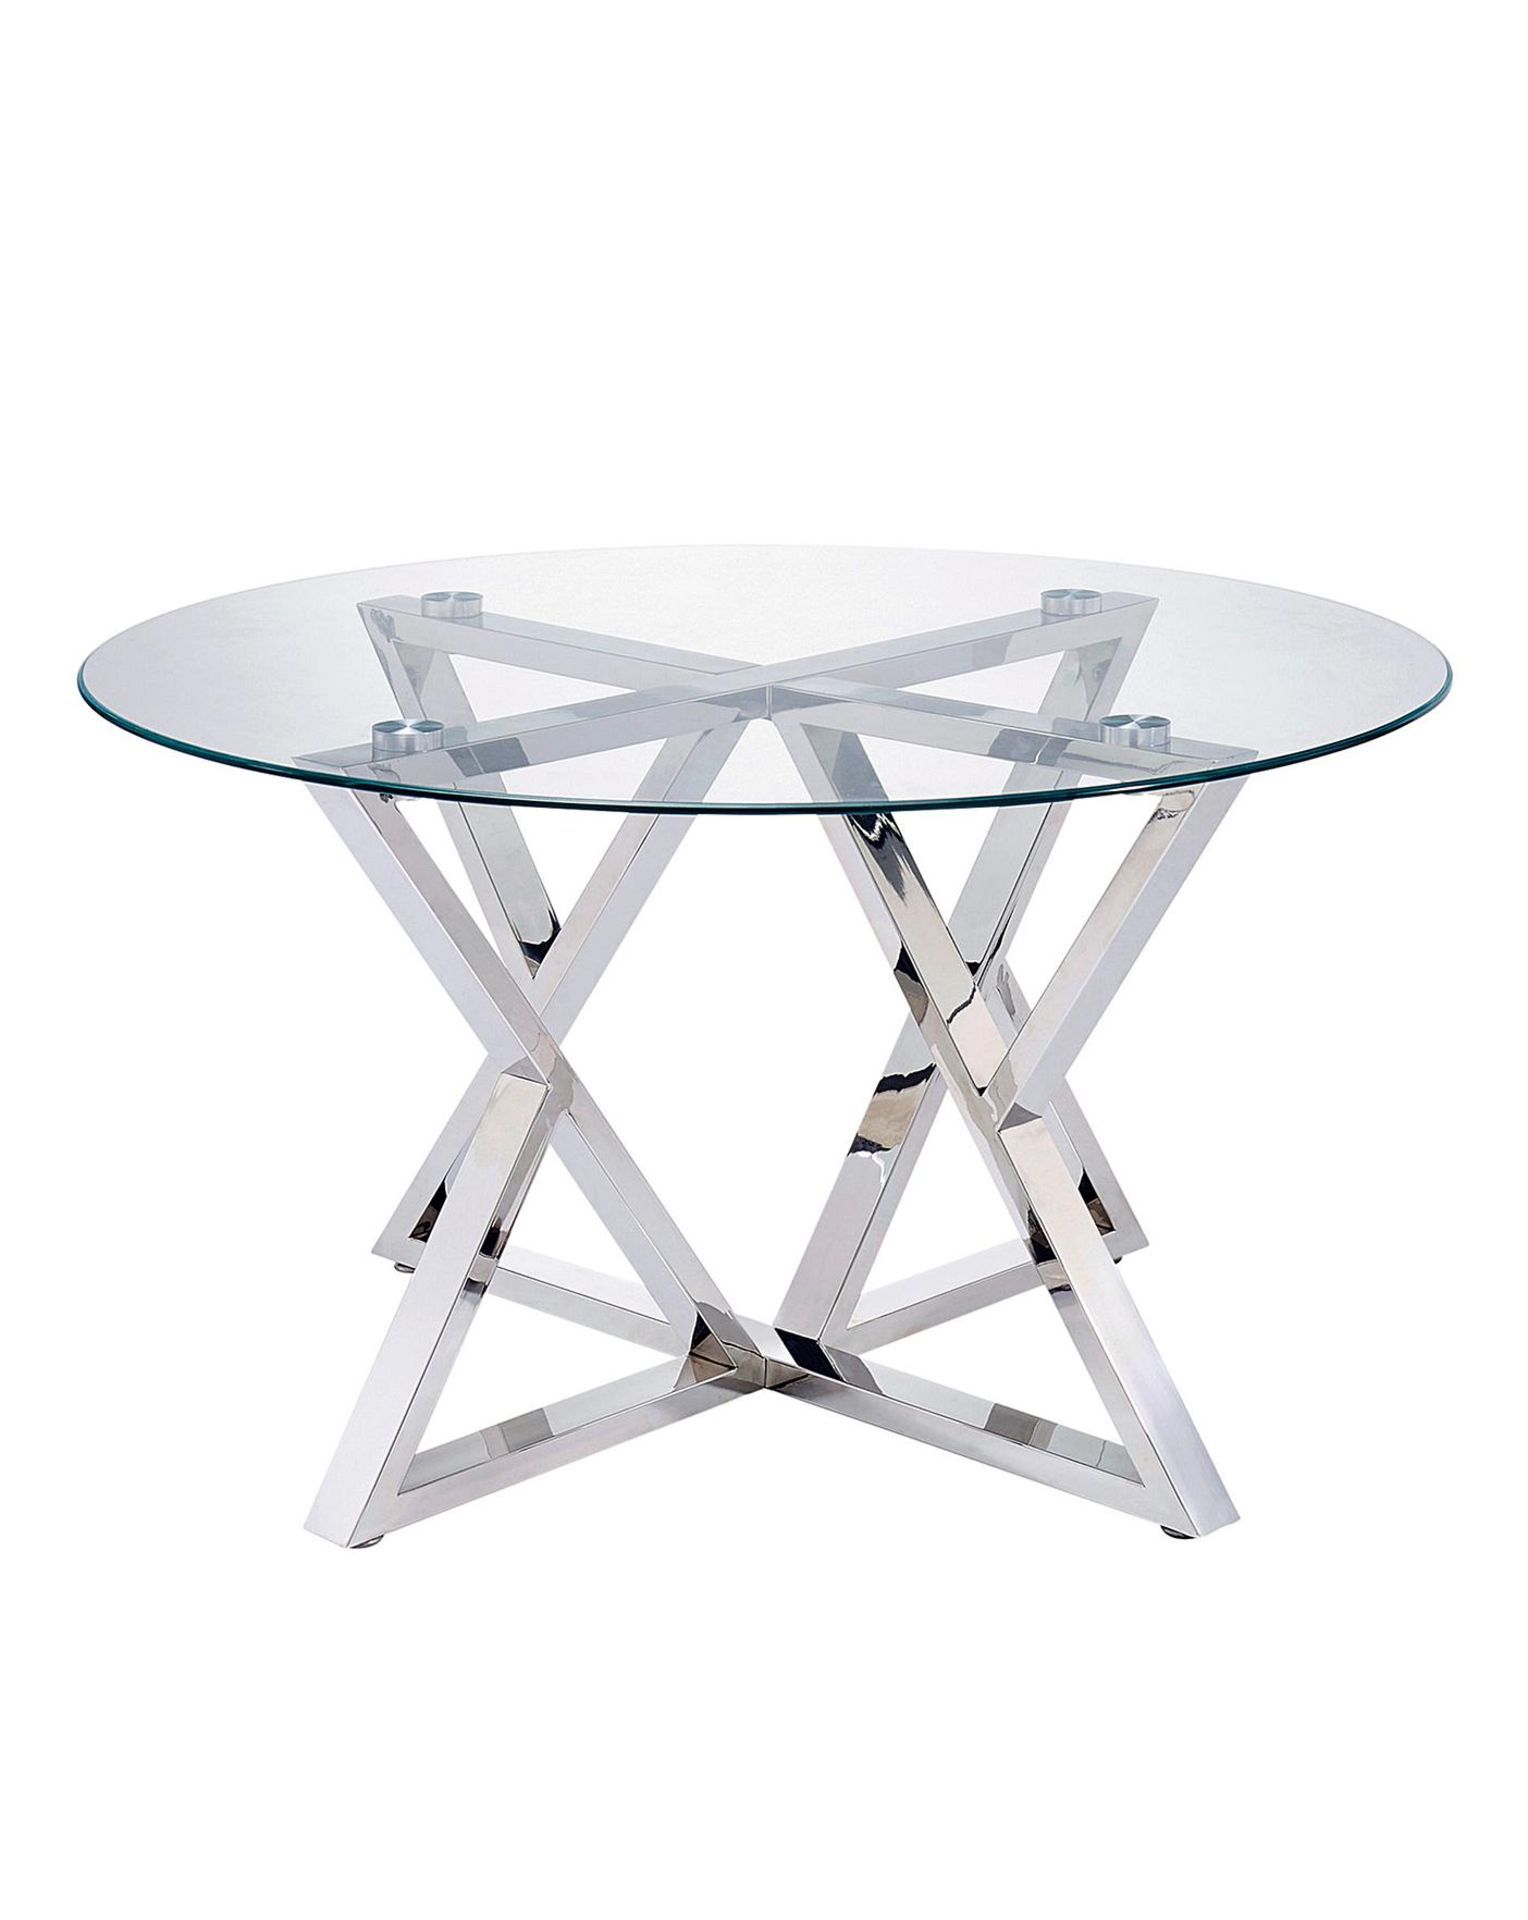 Brand New Estelle Coffee Table Chrome/Glass, Luxury Modern Look Coffee Table for that Centre piece - Image 2 of 2